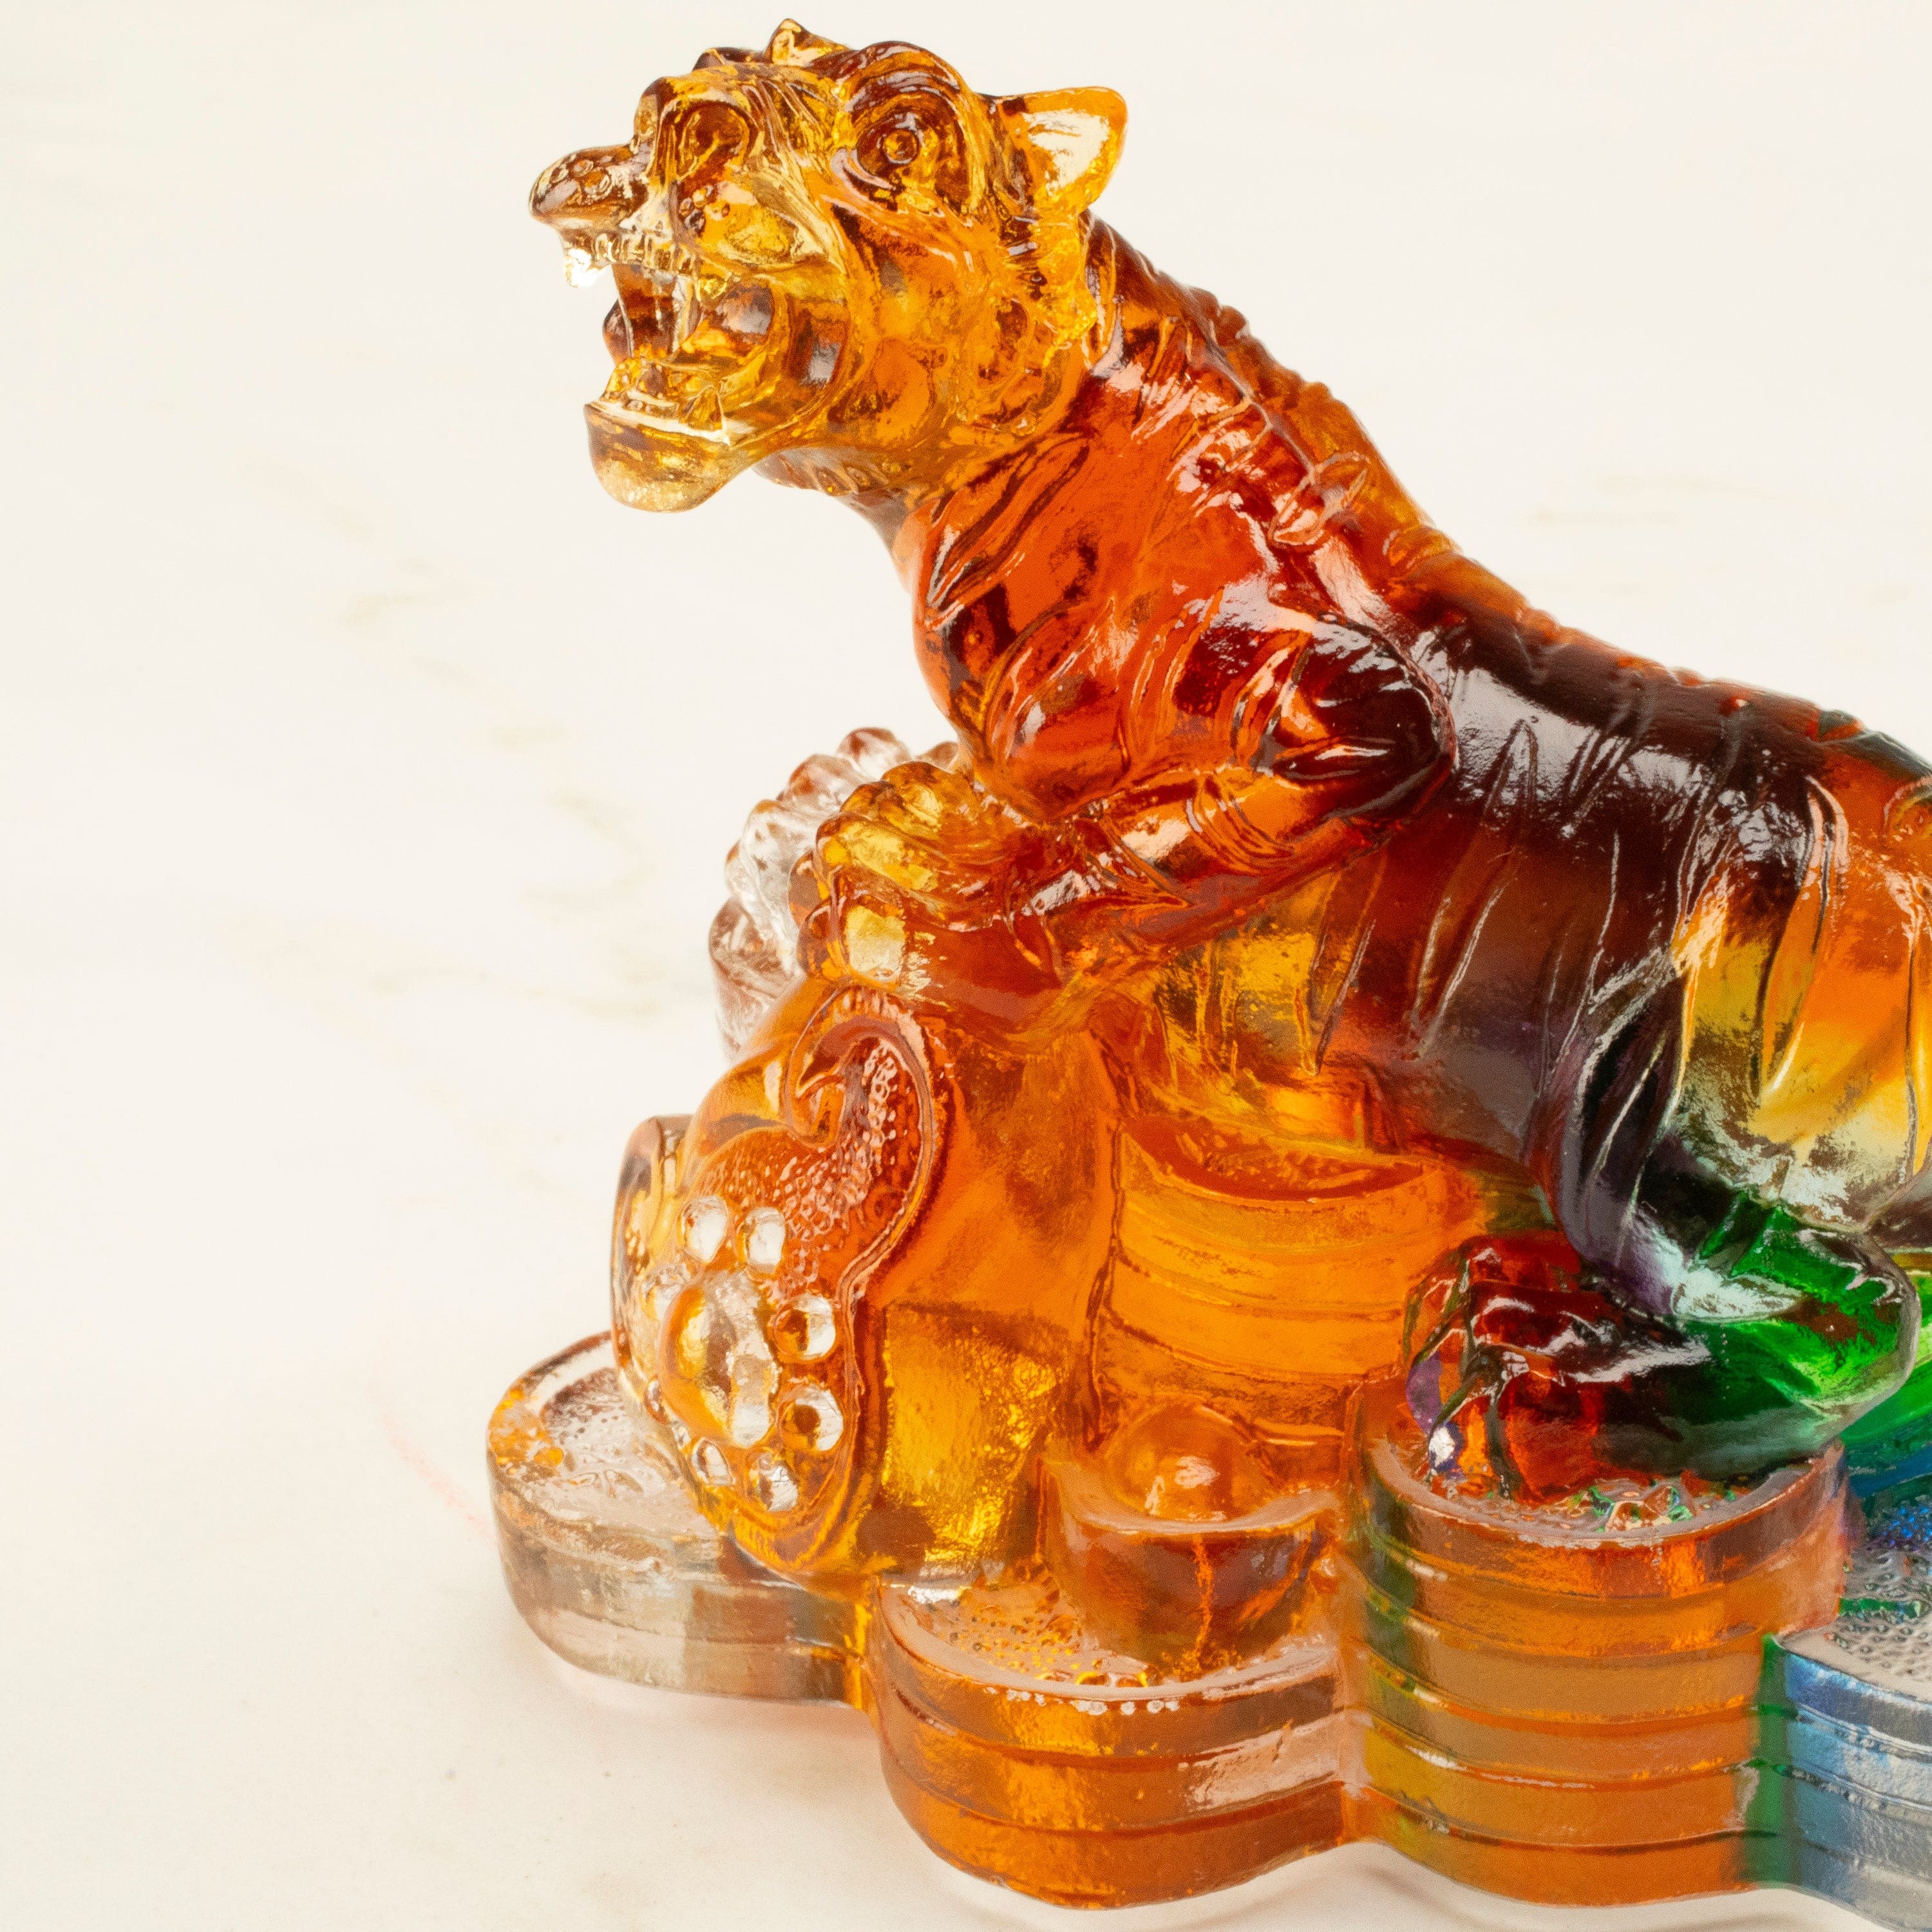 Kalifano Crystal Carving Roaring Tiger Crystal Carving - A Symbol of Courage and Strength CRZ110-TIG